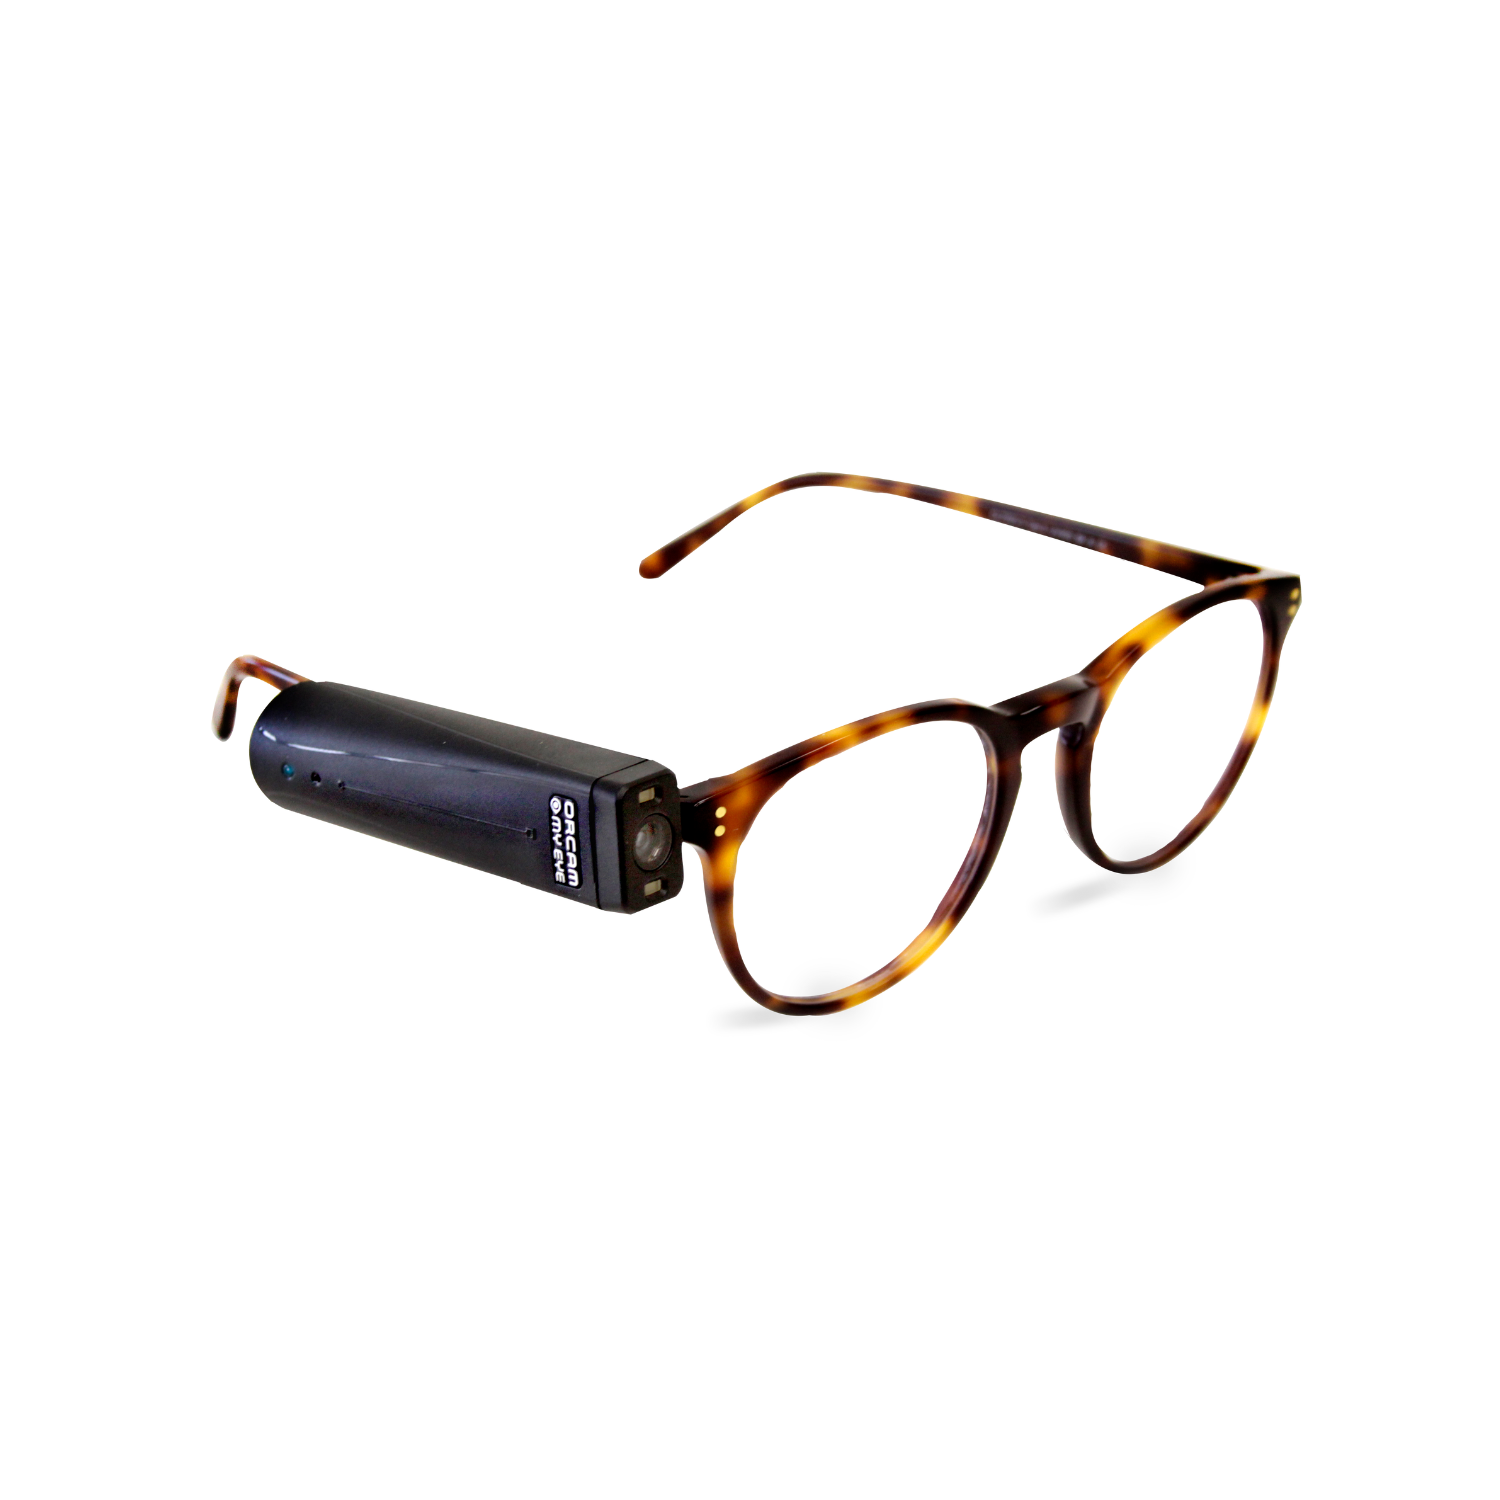 Image of the Orcam Myeye 3 Pro AI Vision Assistant attached to included glasses.